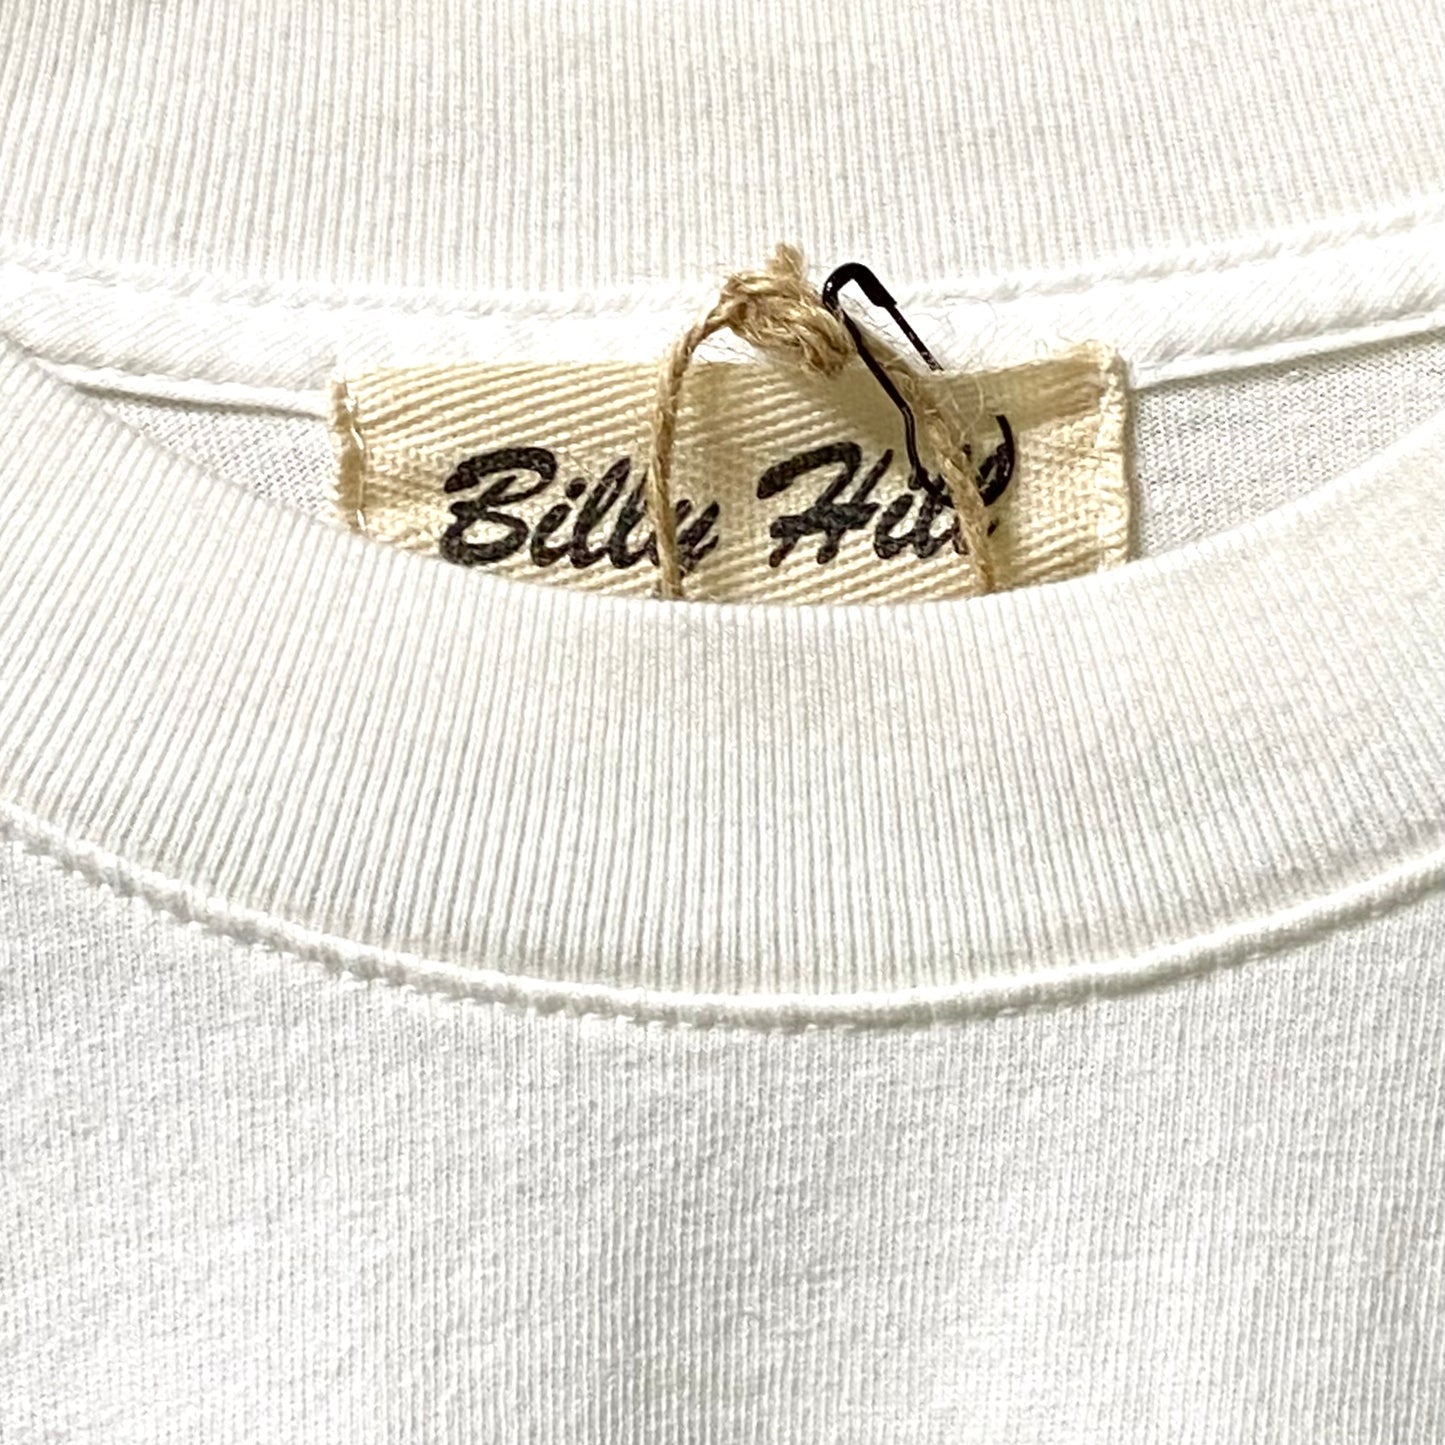 2022 billy hill trust in the lord white t-shirt